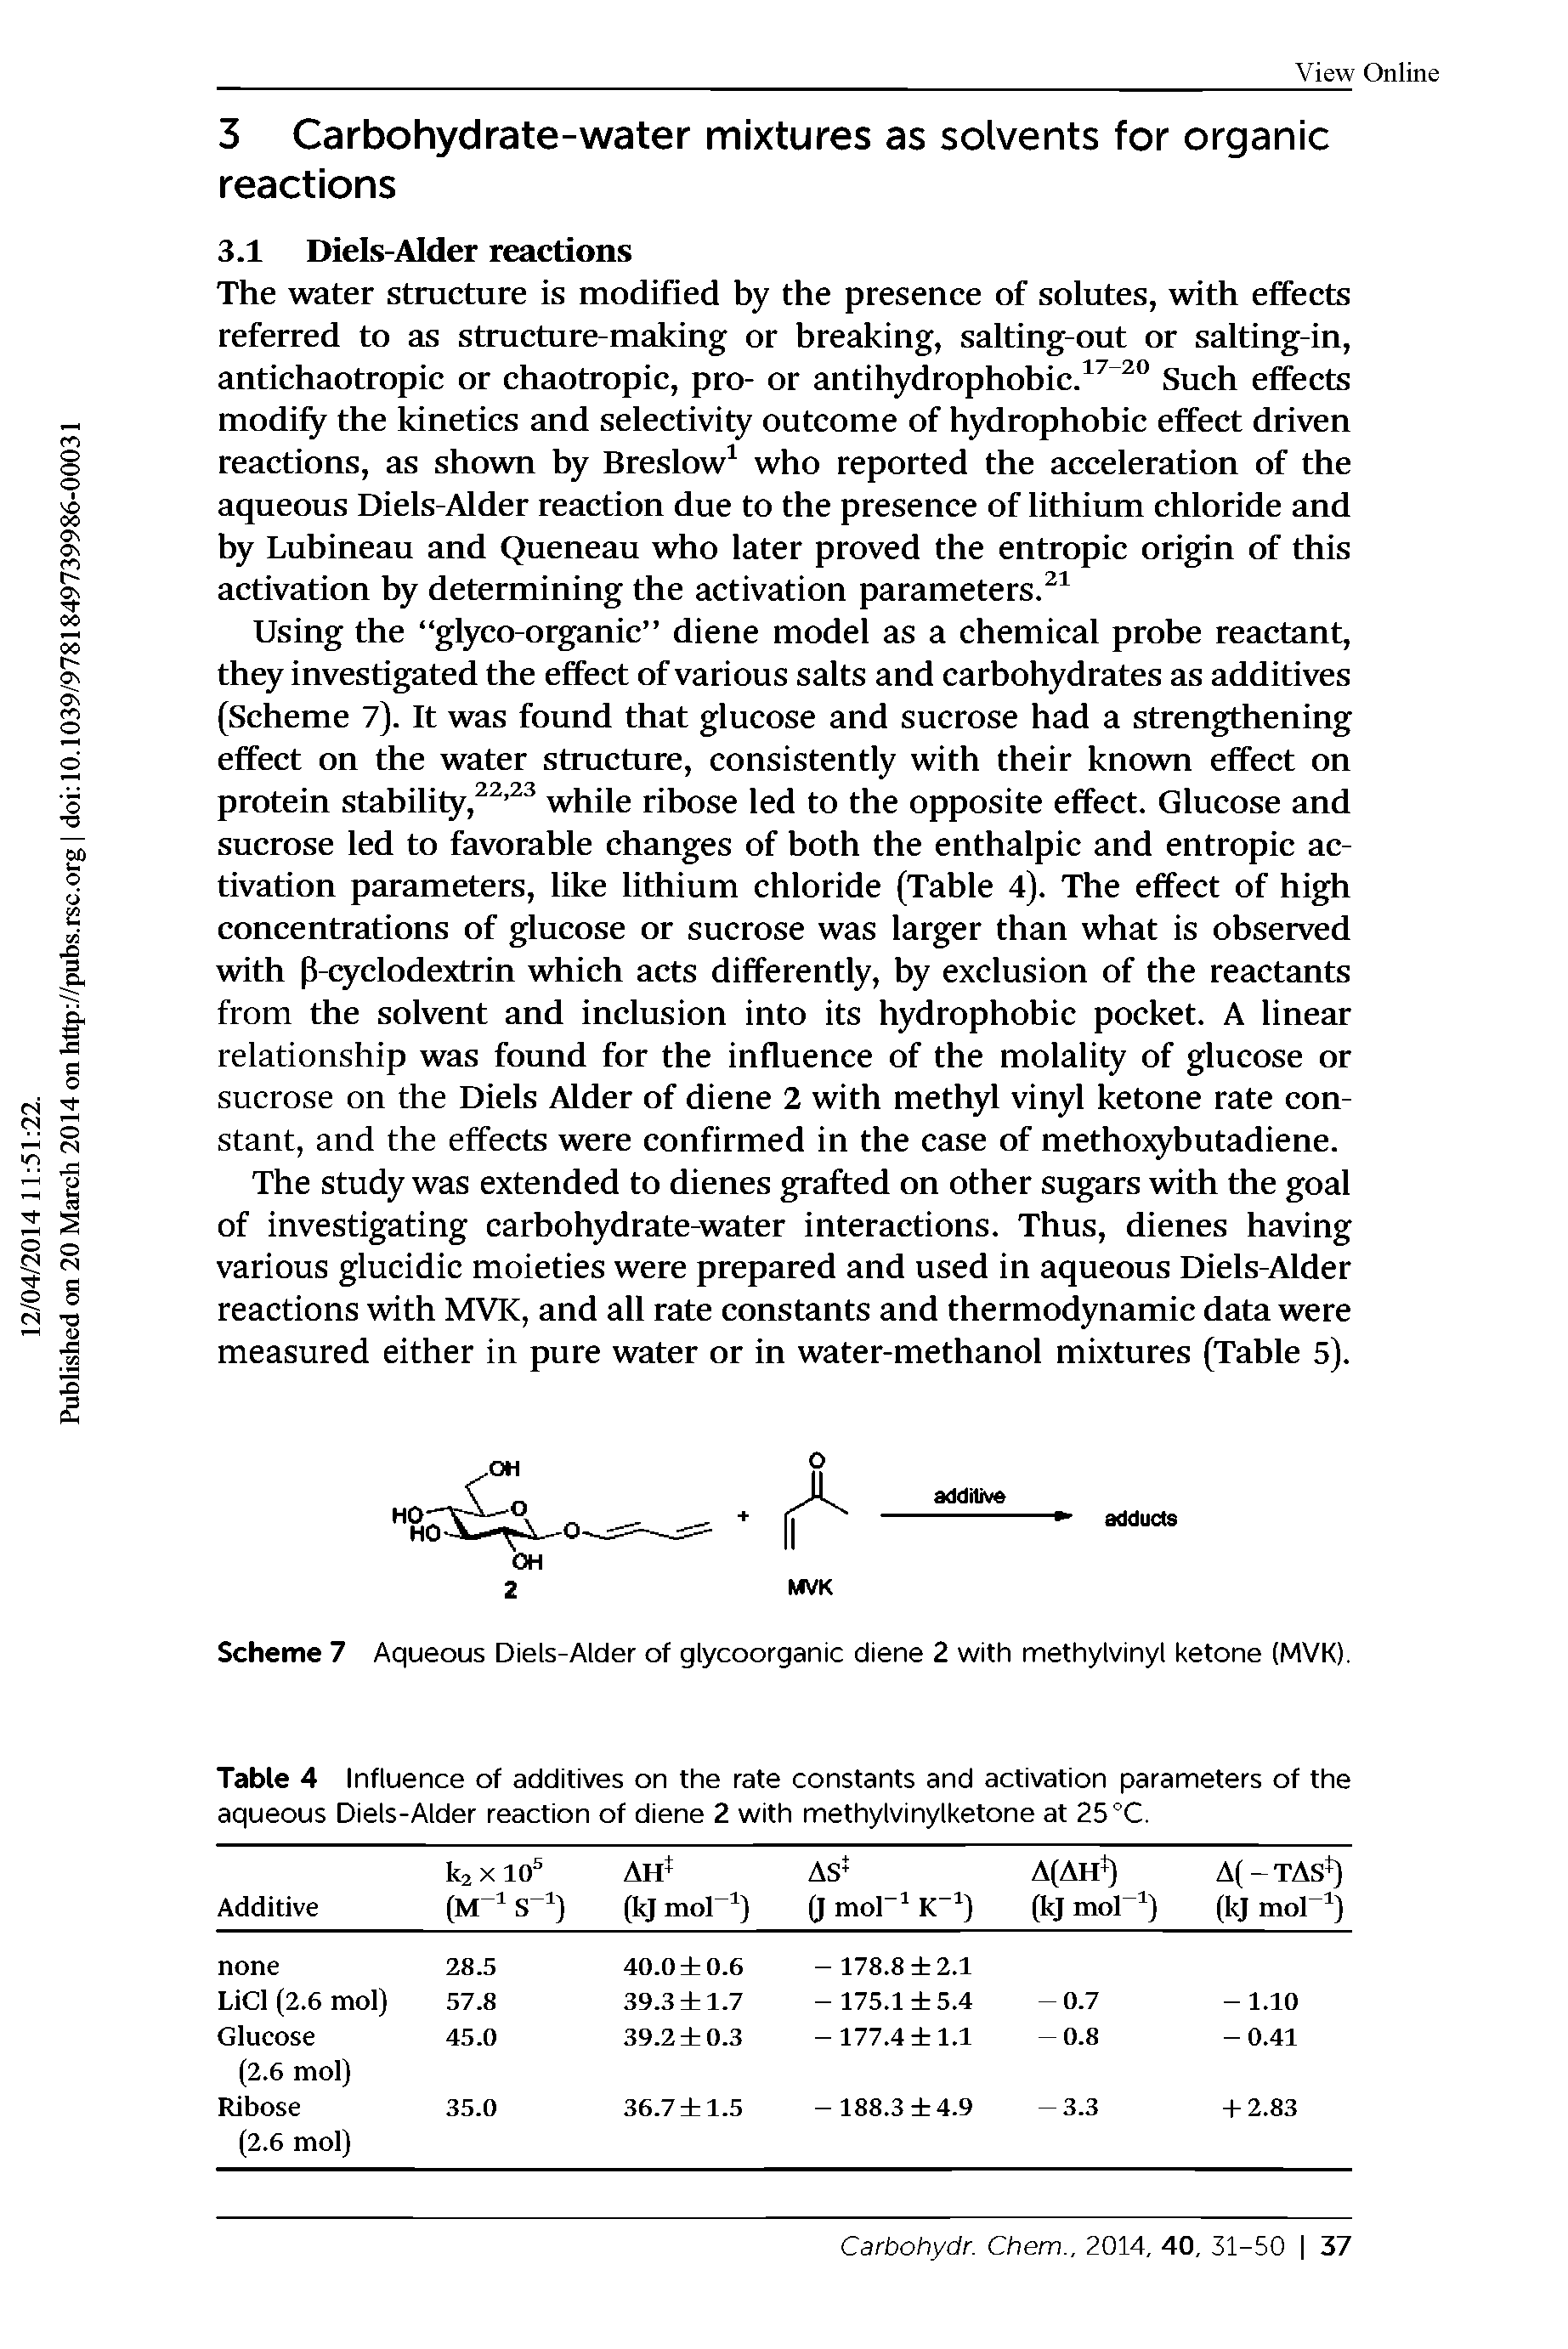 Table 4 Influence of additives on the rate constants and activation parameters of the aqueous Diels-Alder reaction of diene 2 with methylvinylketone at 25 °C.